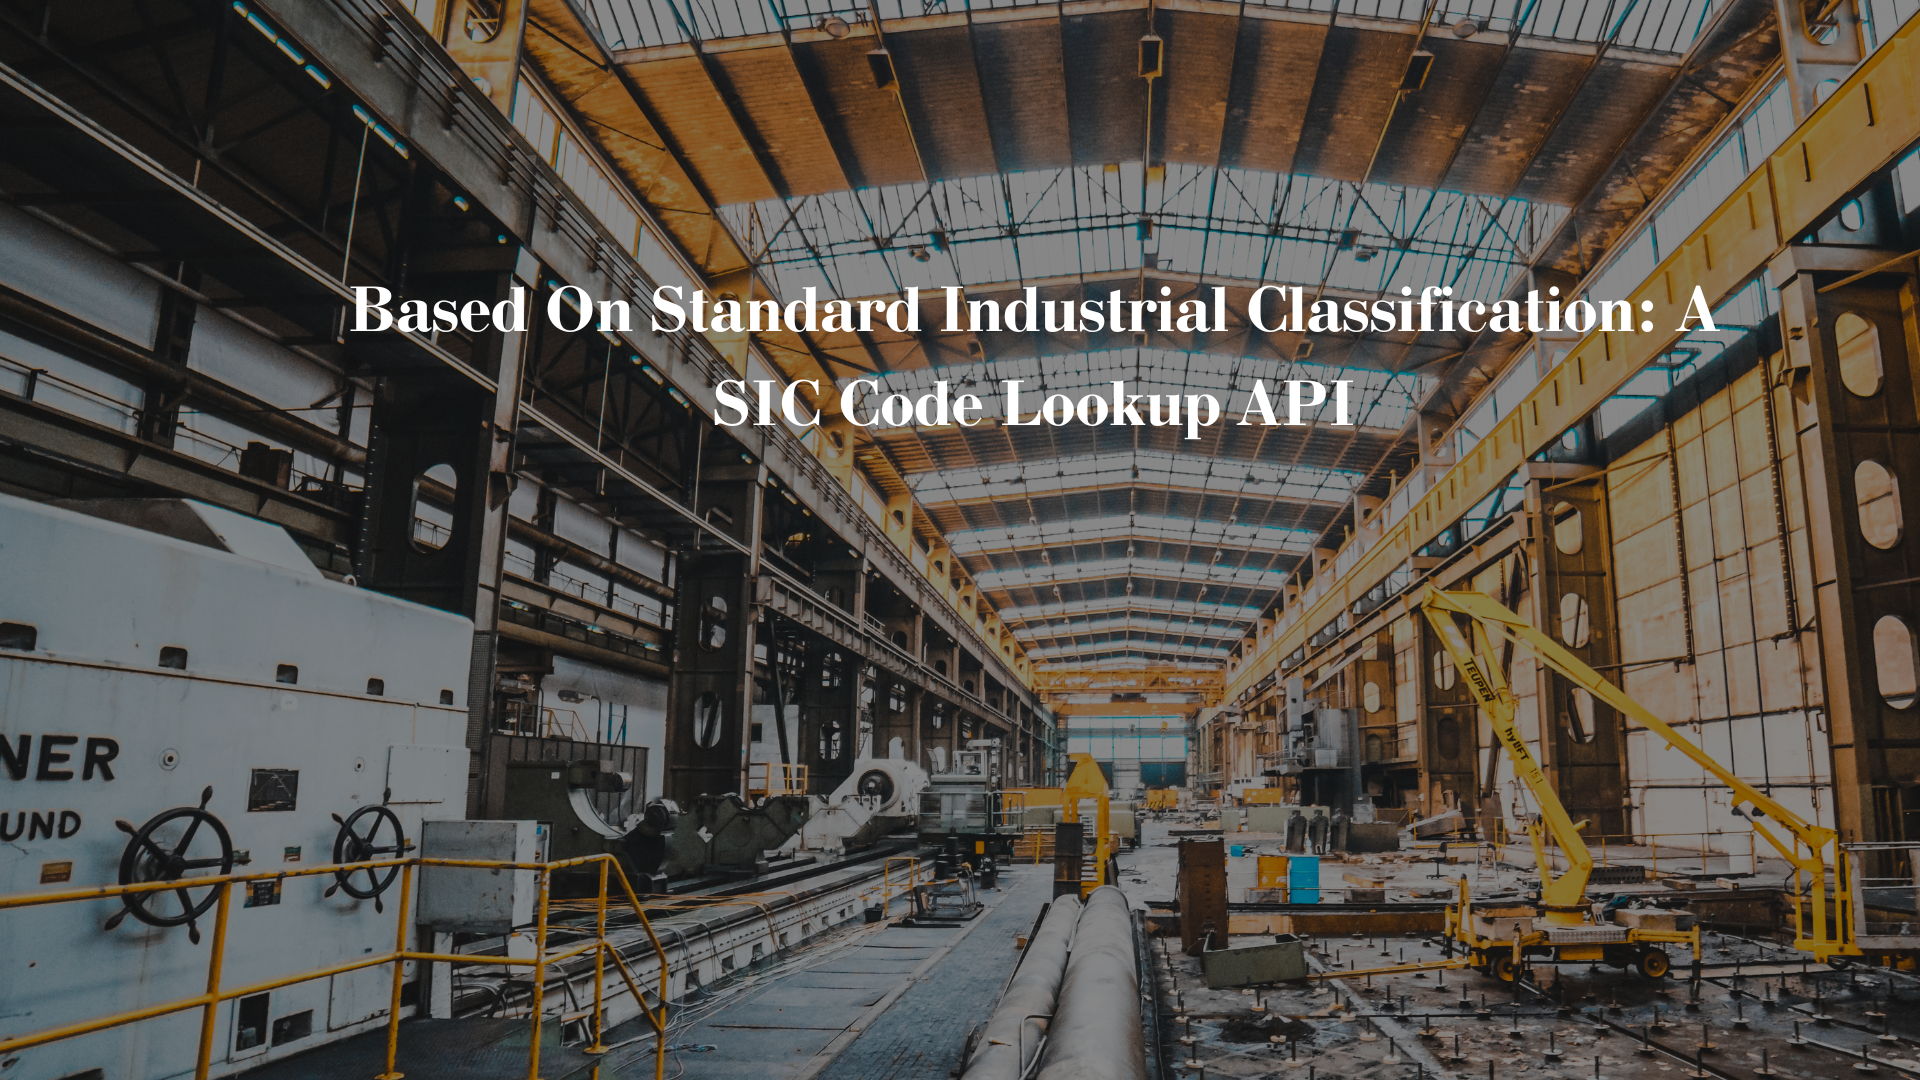 Based On Standard Industrial Classification: A SIC Code Lookup API